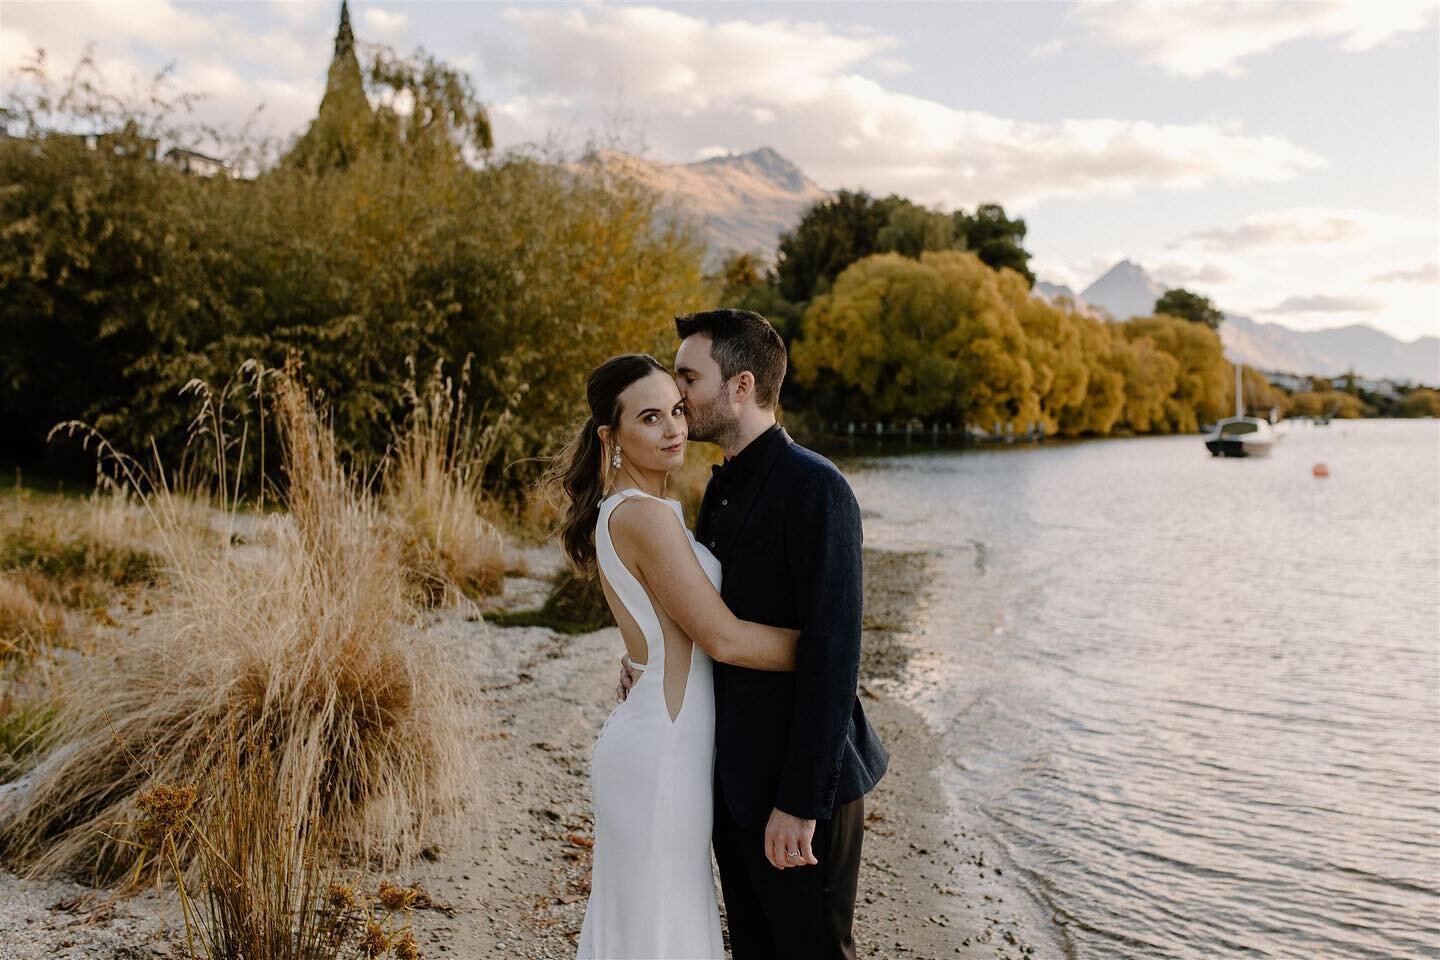 We love the colours in this lakeside portrait of Haley and Joe ✨